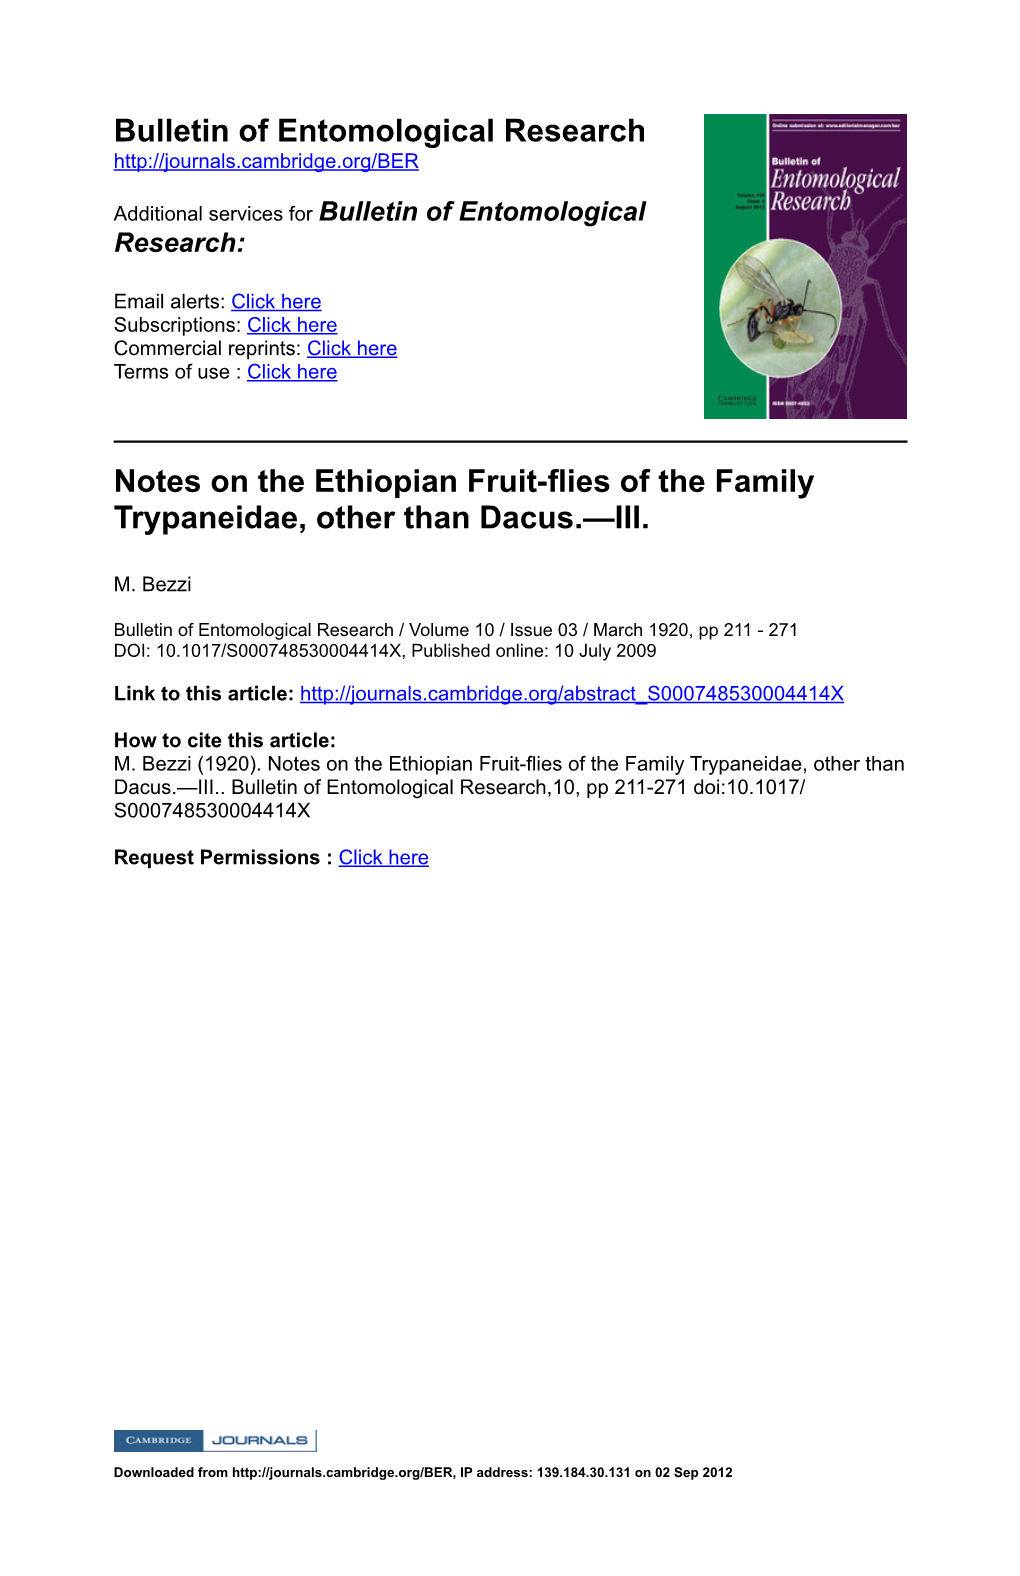 Bulletin of Entomological Research Notes on the Ethiopian Fruitflies of the Family Trypaneidae, Other Than Dacu